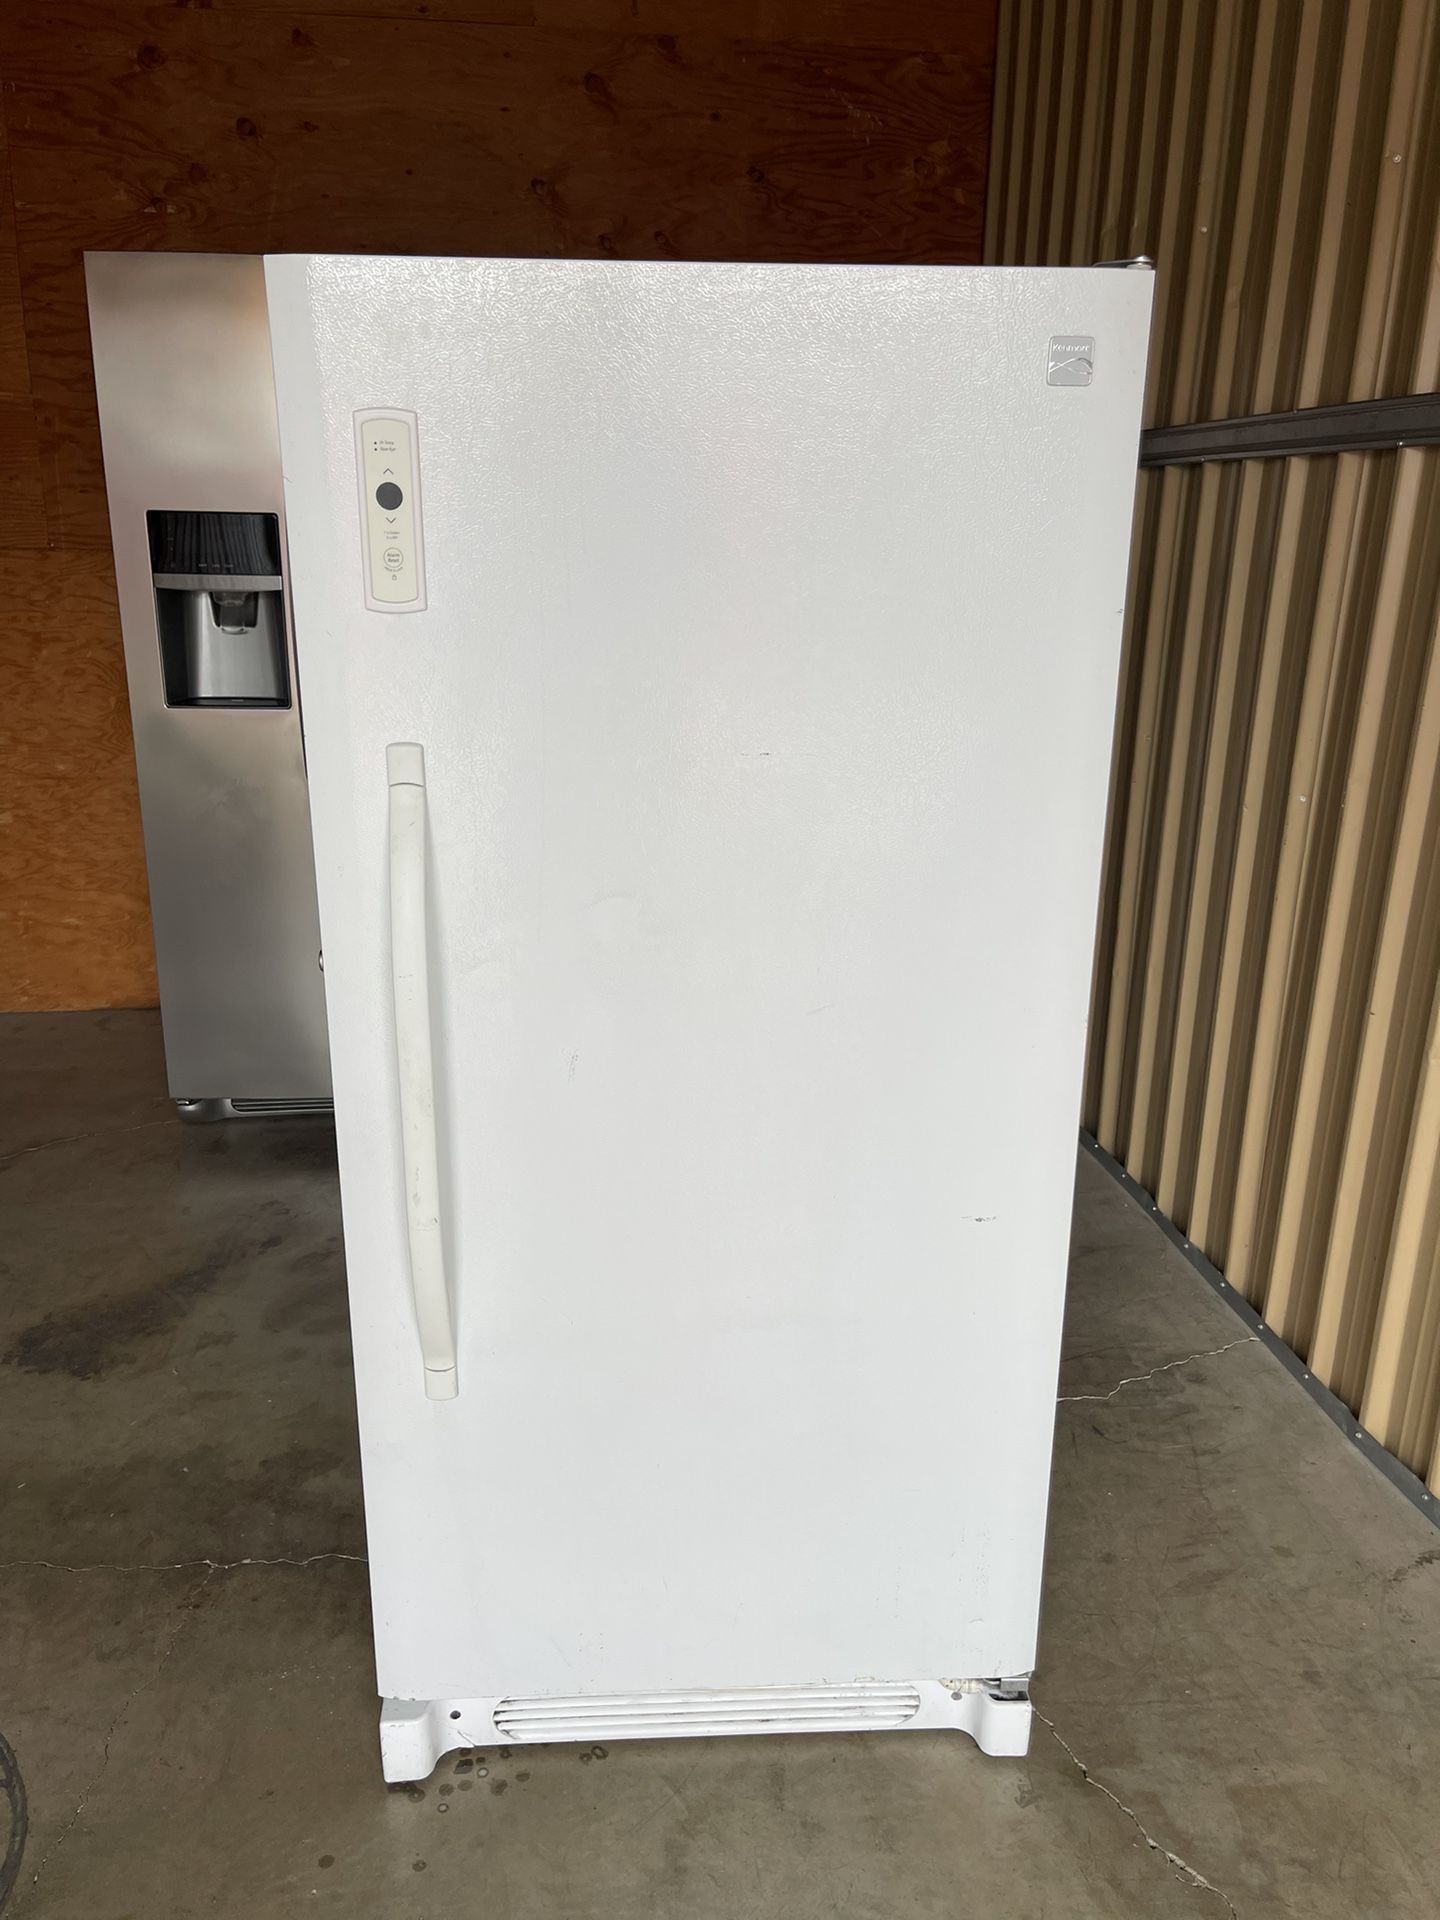 KENMORE STAND UP FREEZER $200 OBO *** WORKS GREAT,90 DAY WARRANTY, DELIVERY AVAILABLE 